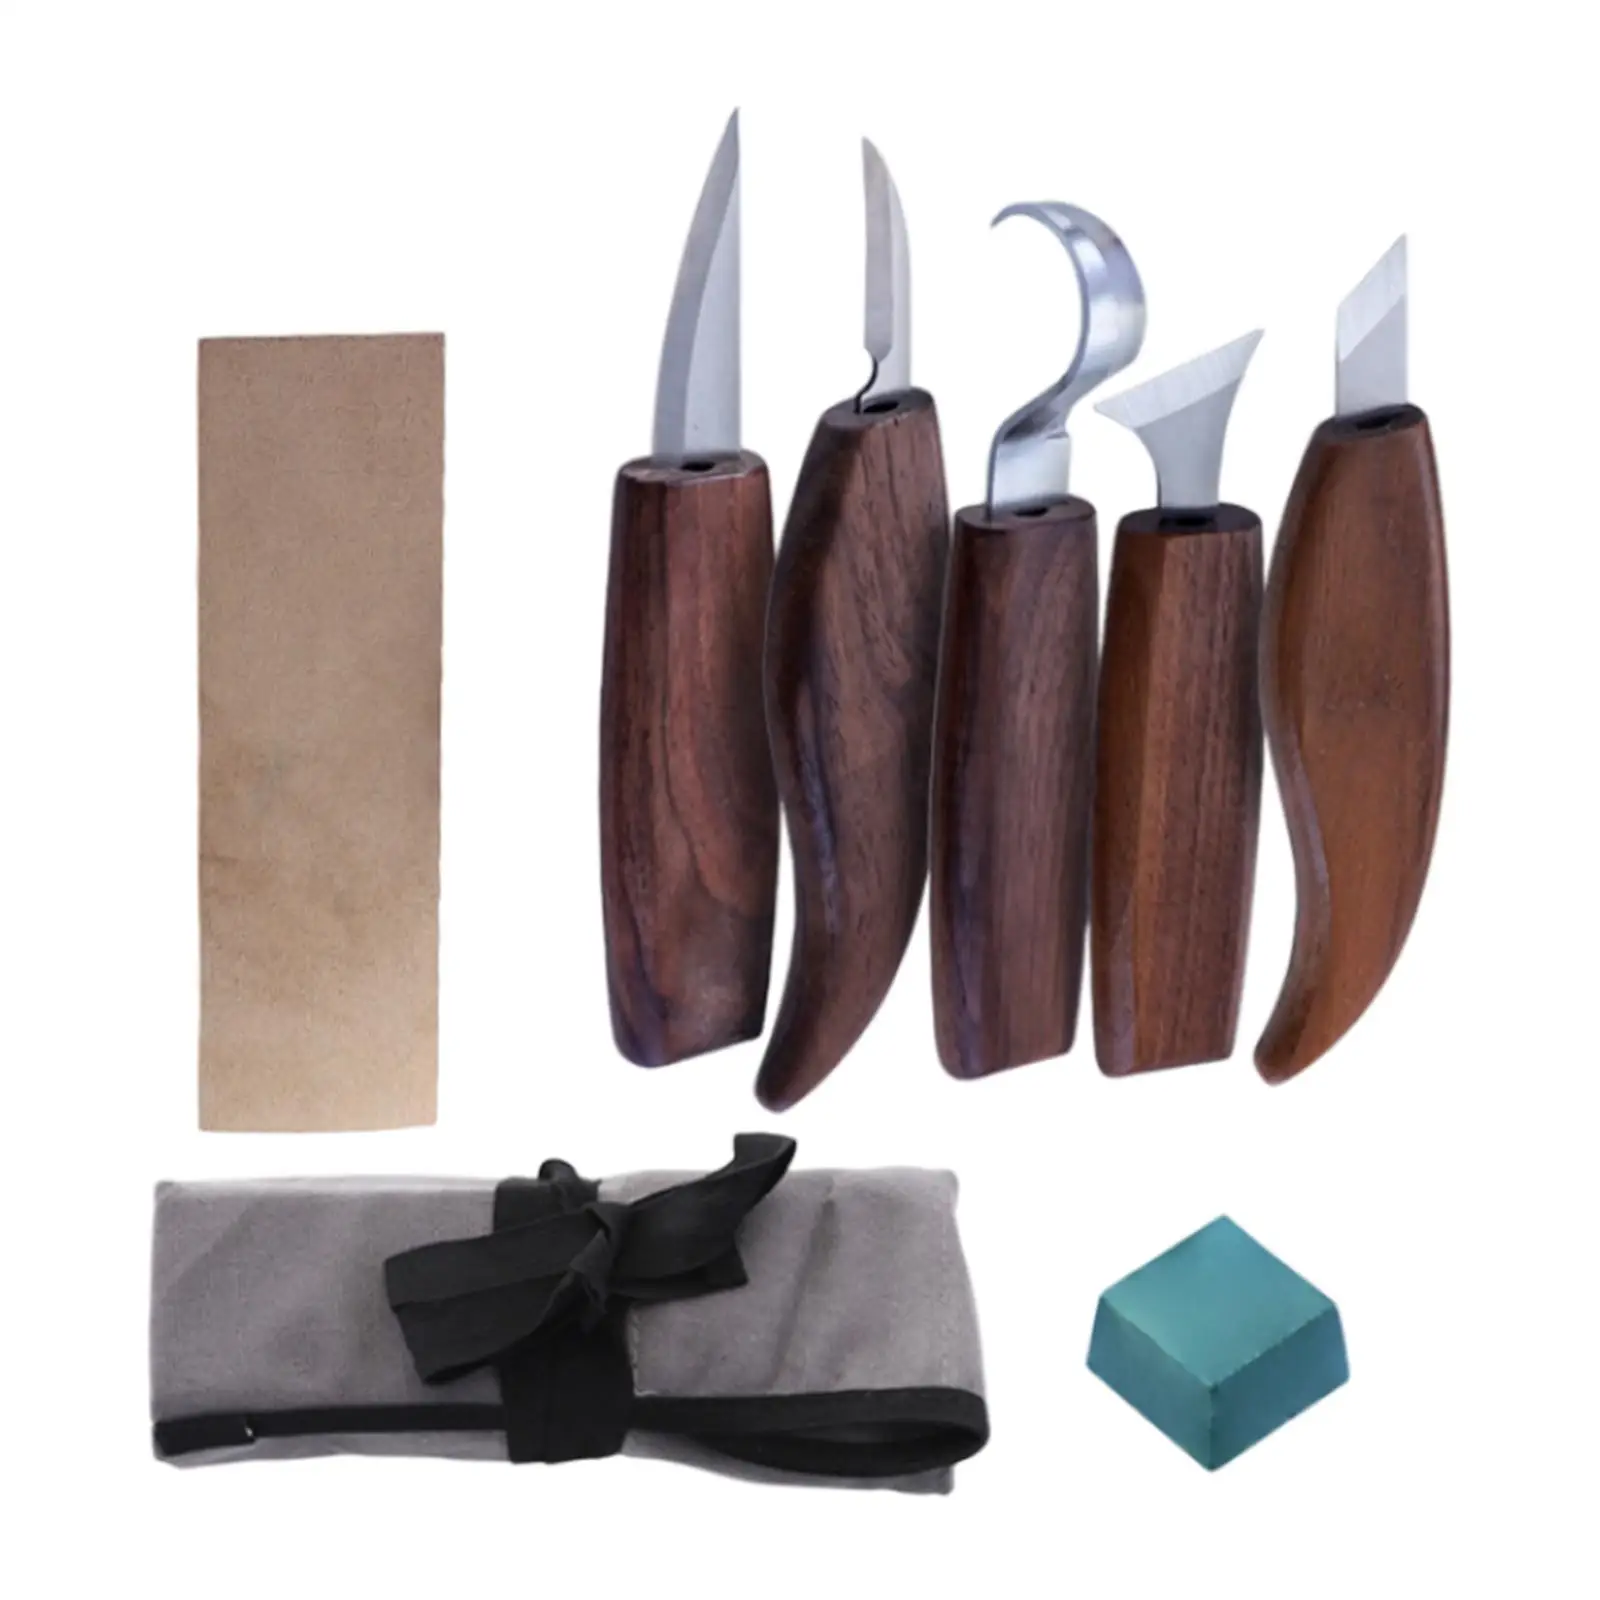 8Pcs Wood Carving Kits Flat Handle Wear Resistant Durable Beginners Whittling Kits for Handmade Wood Carving Fathers Gifts